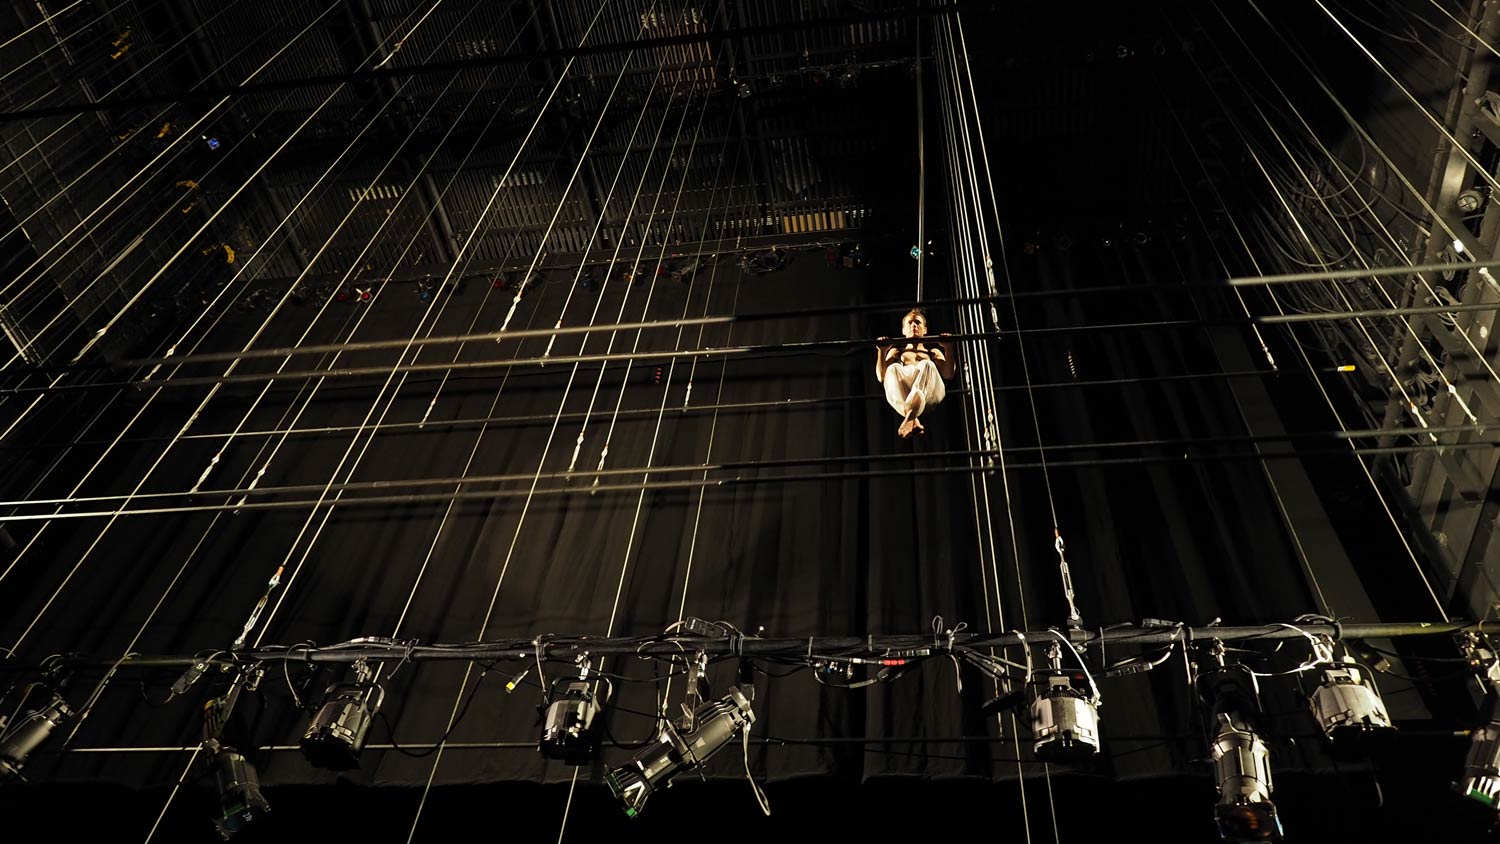 AK Burns suspended from a theater fly tower in a black box theater. 